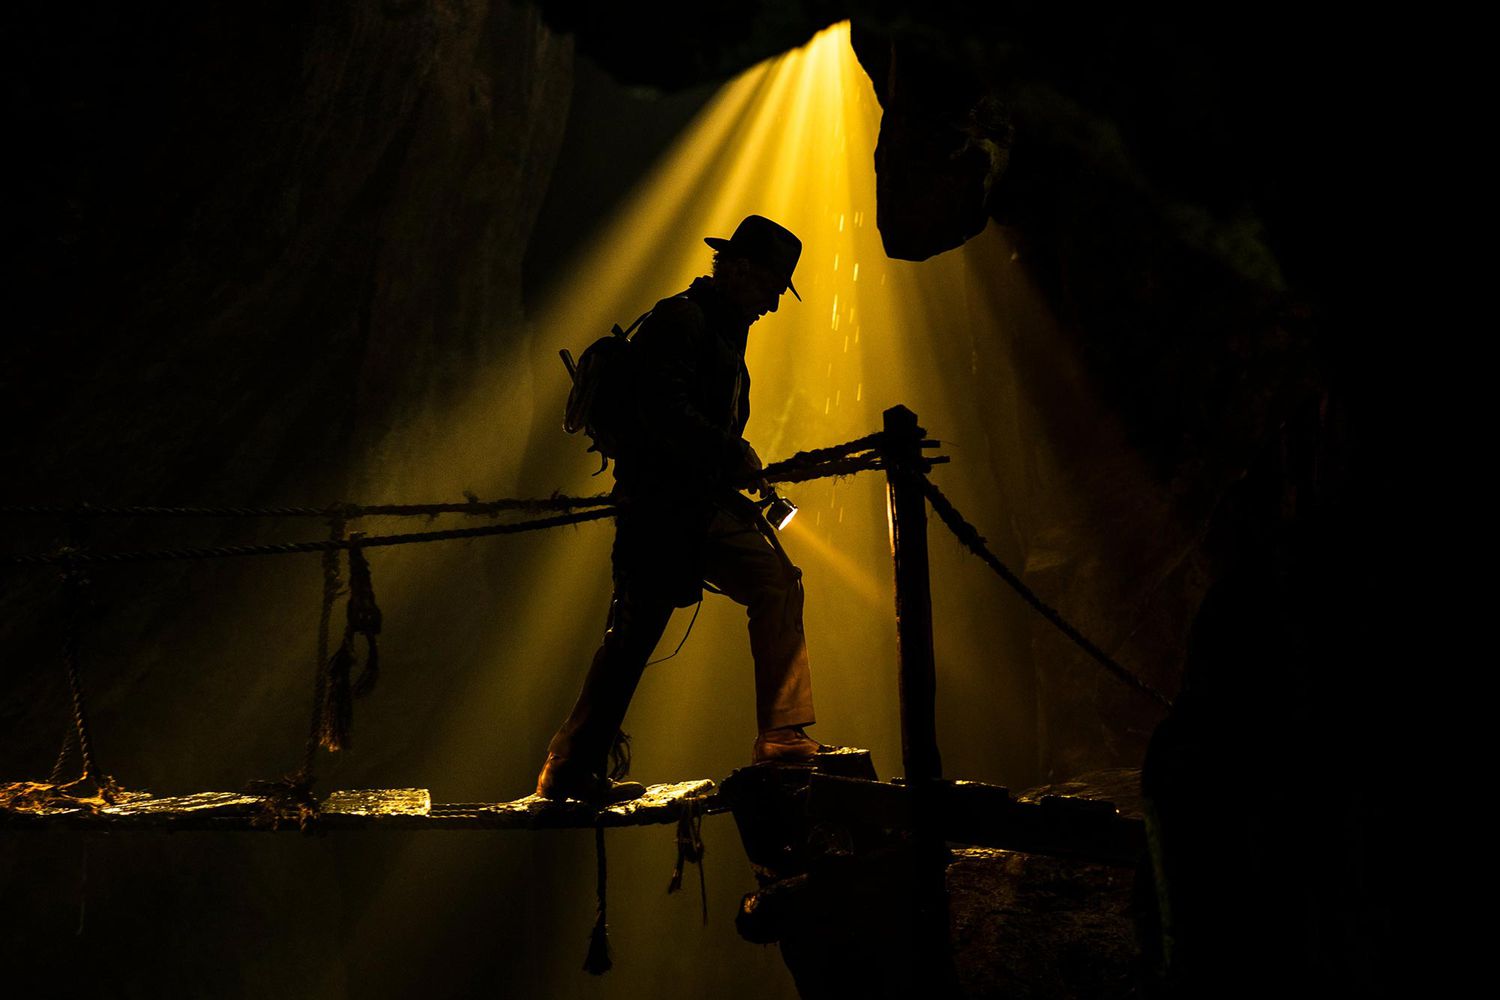 Harrison Ford as Indiana Jones in Indiana Jone 5 first look